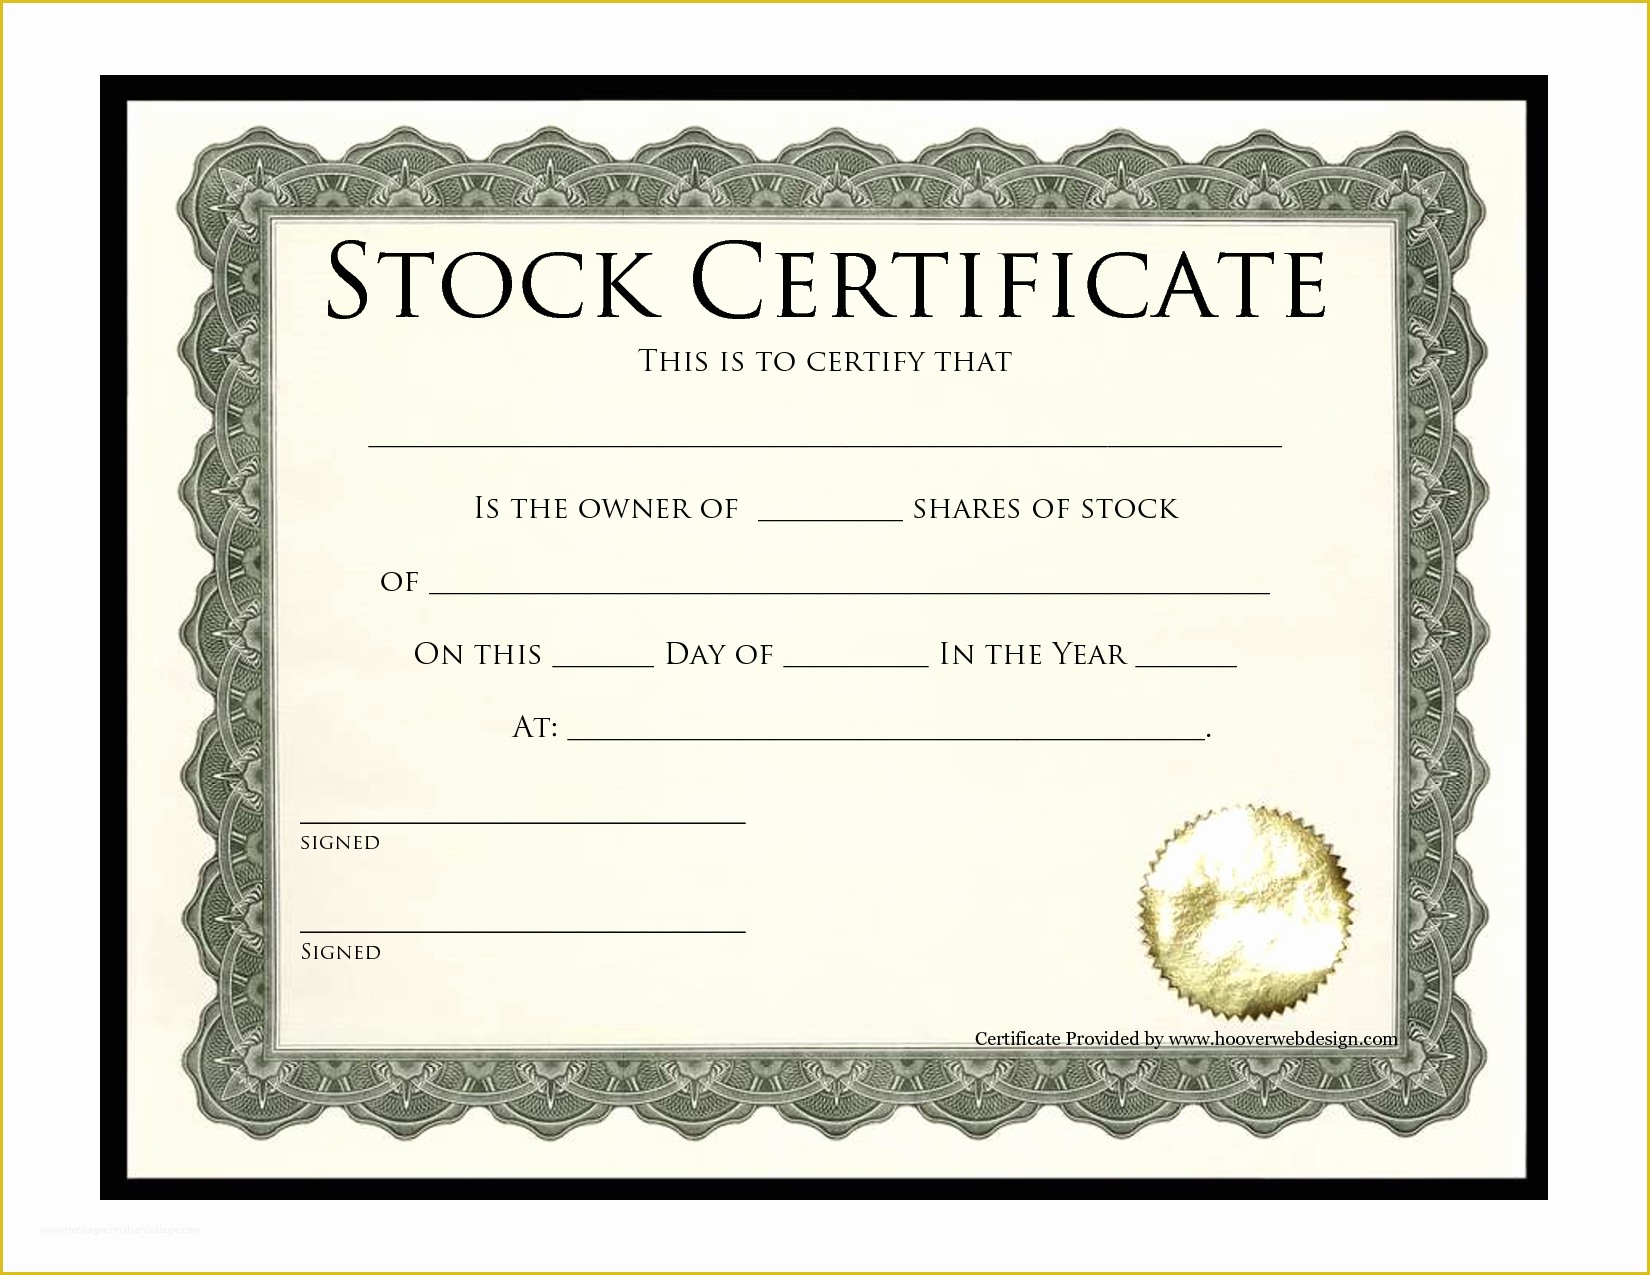 Corporate Stock Certificates Template Free Of Corporation Stock Certificate